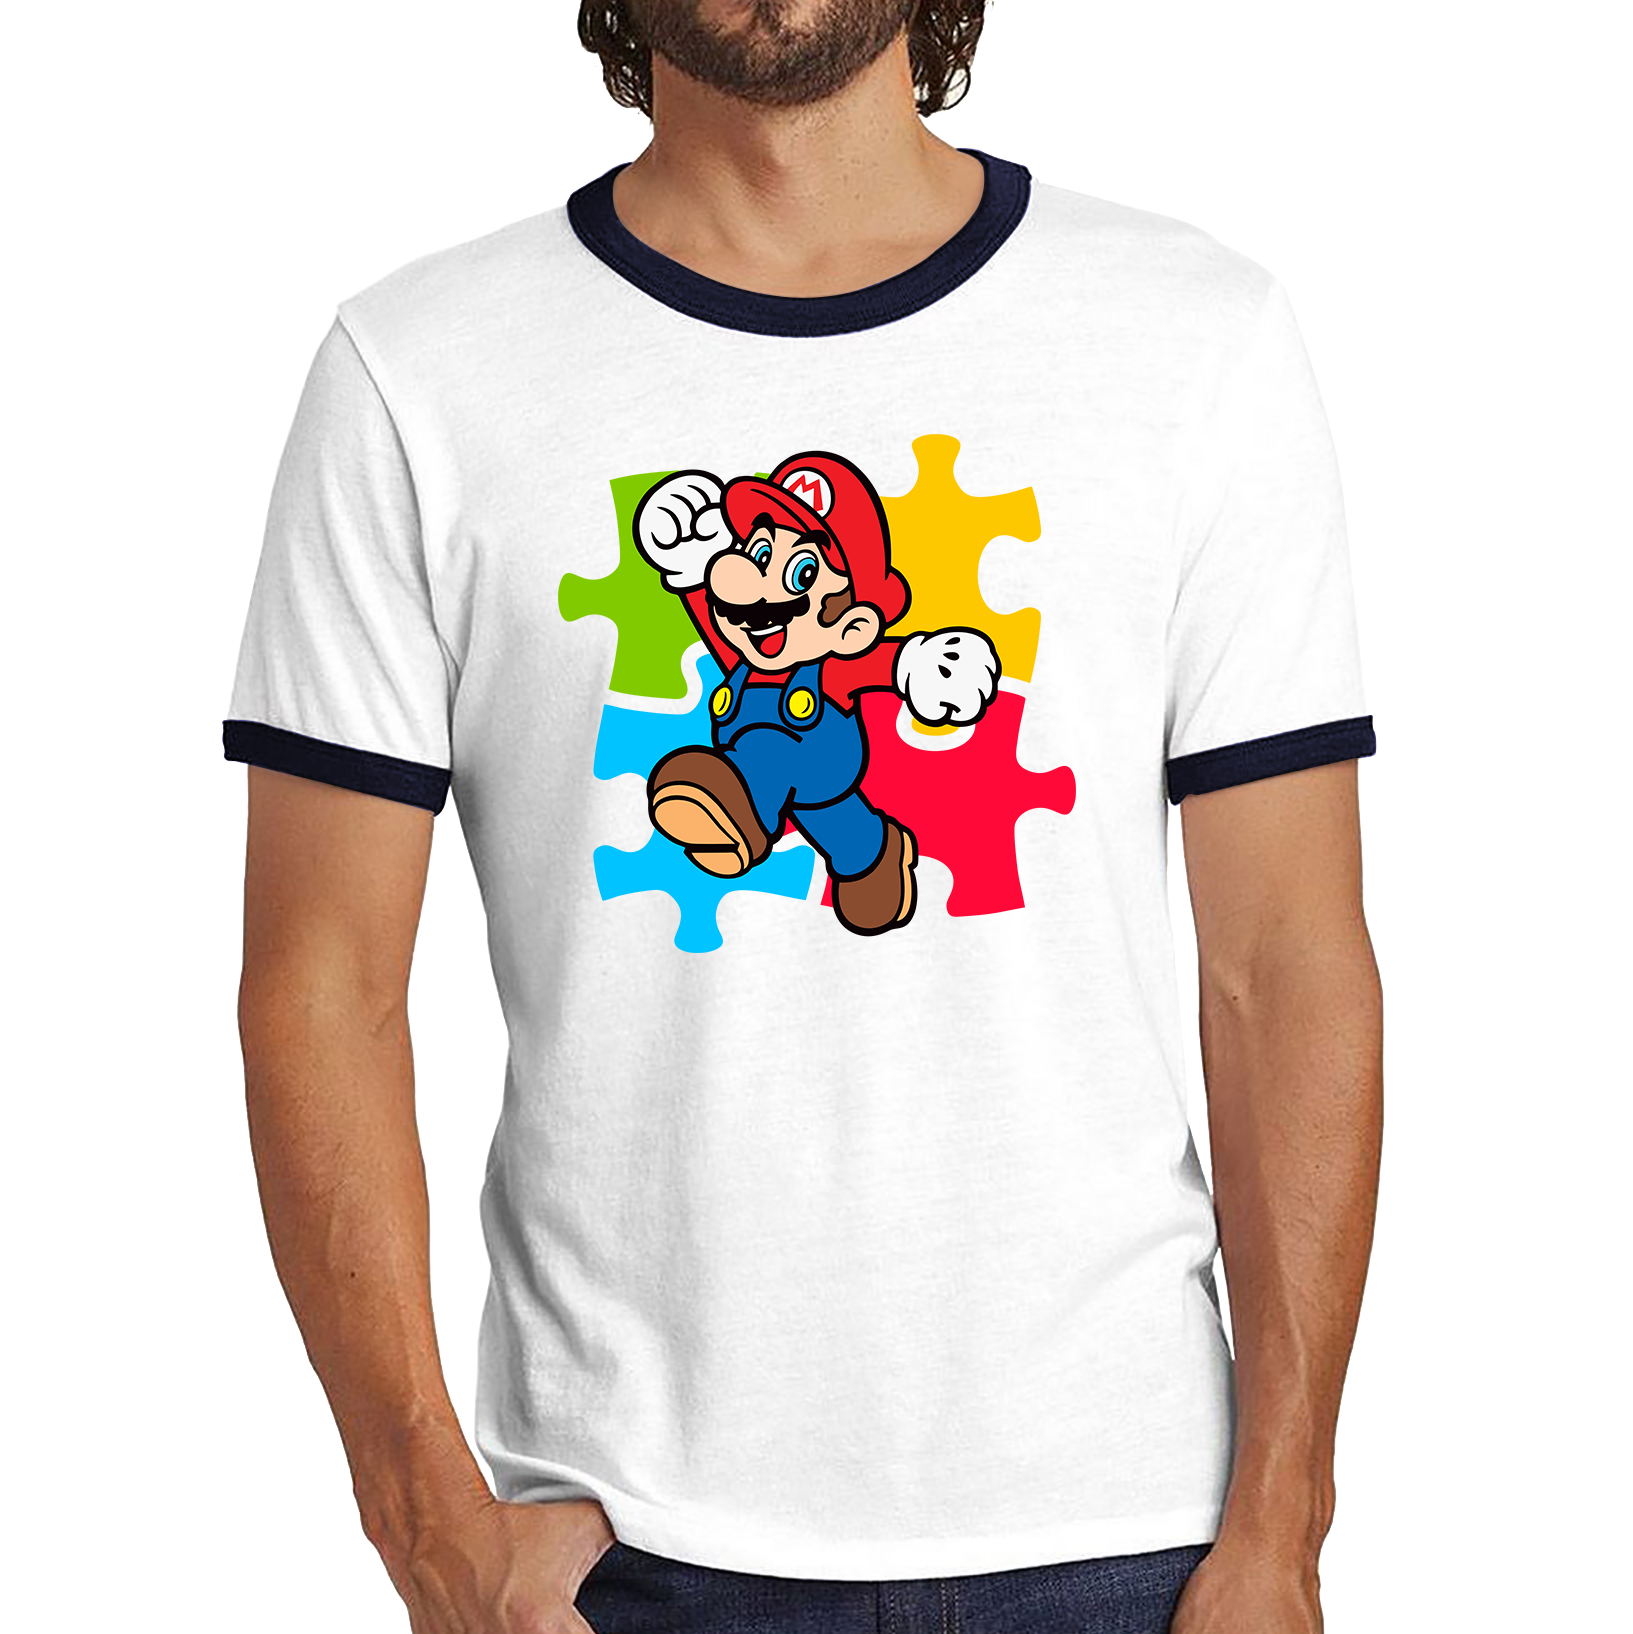 Super Mario Shirt Funny Game Lovers Players Video Game Ringer T Shirt